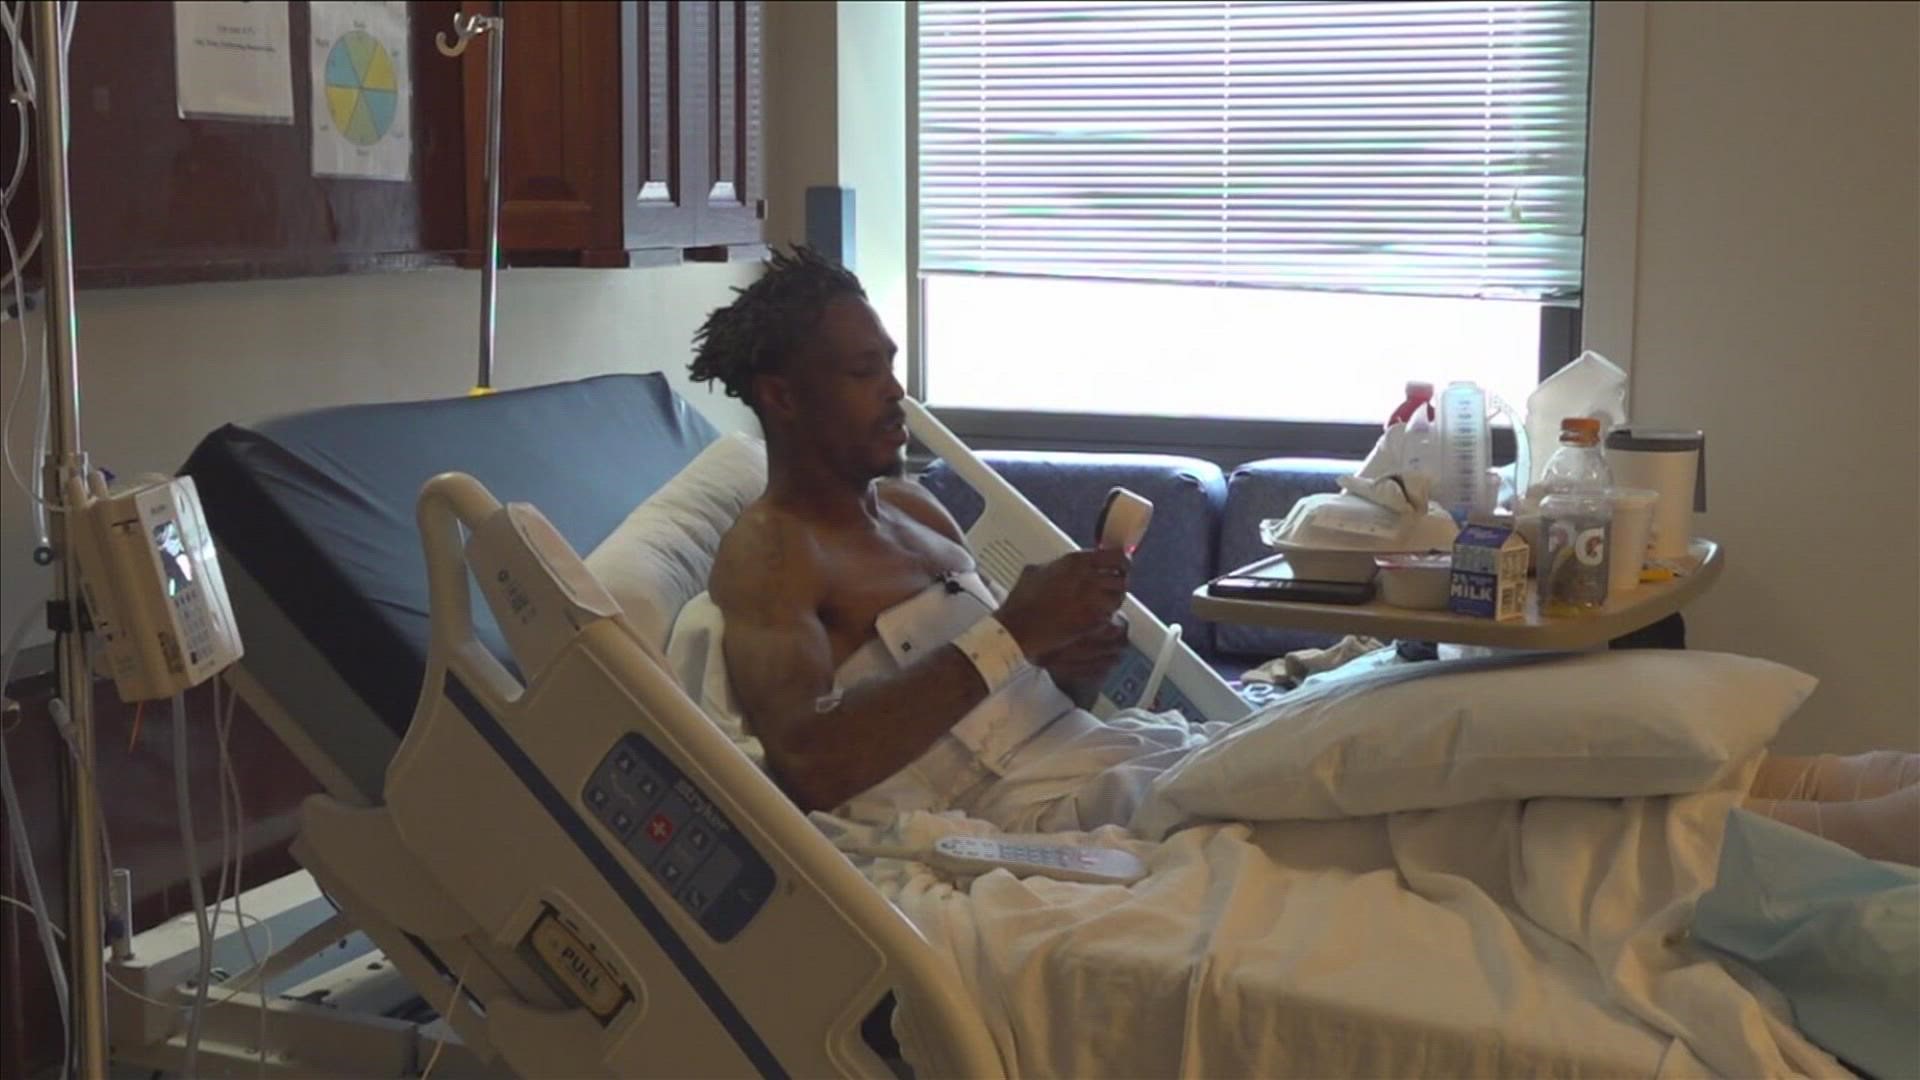 ABC24 Zaria Oates spoke with the patient and reached out to Regional One about the incident.